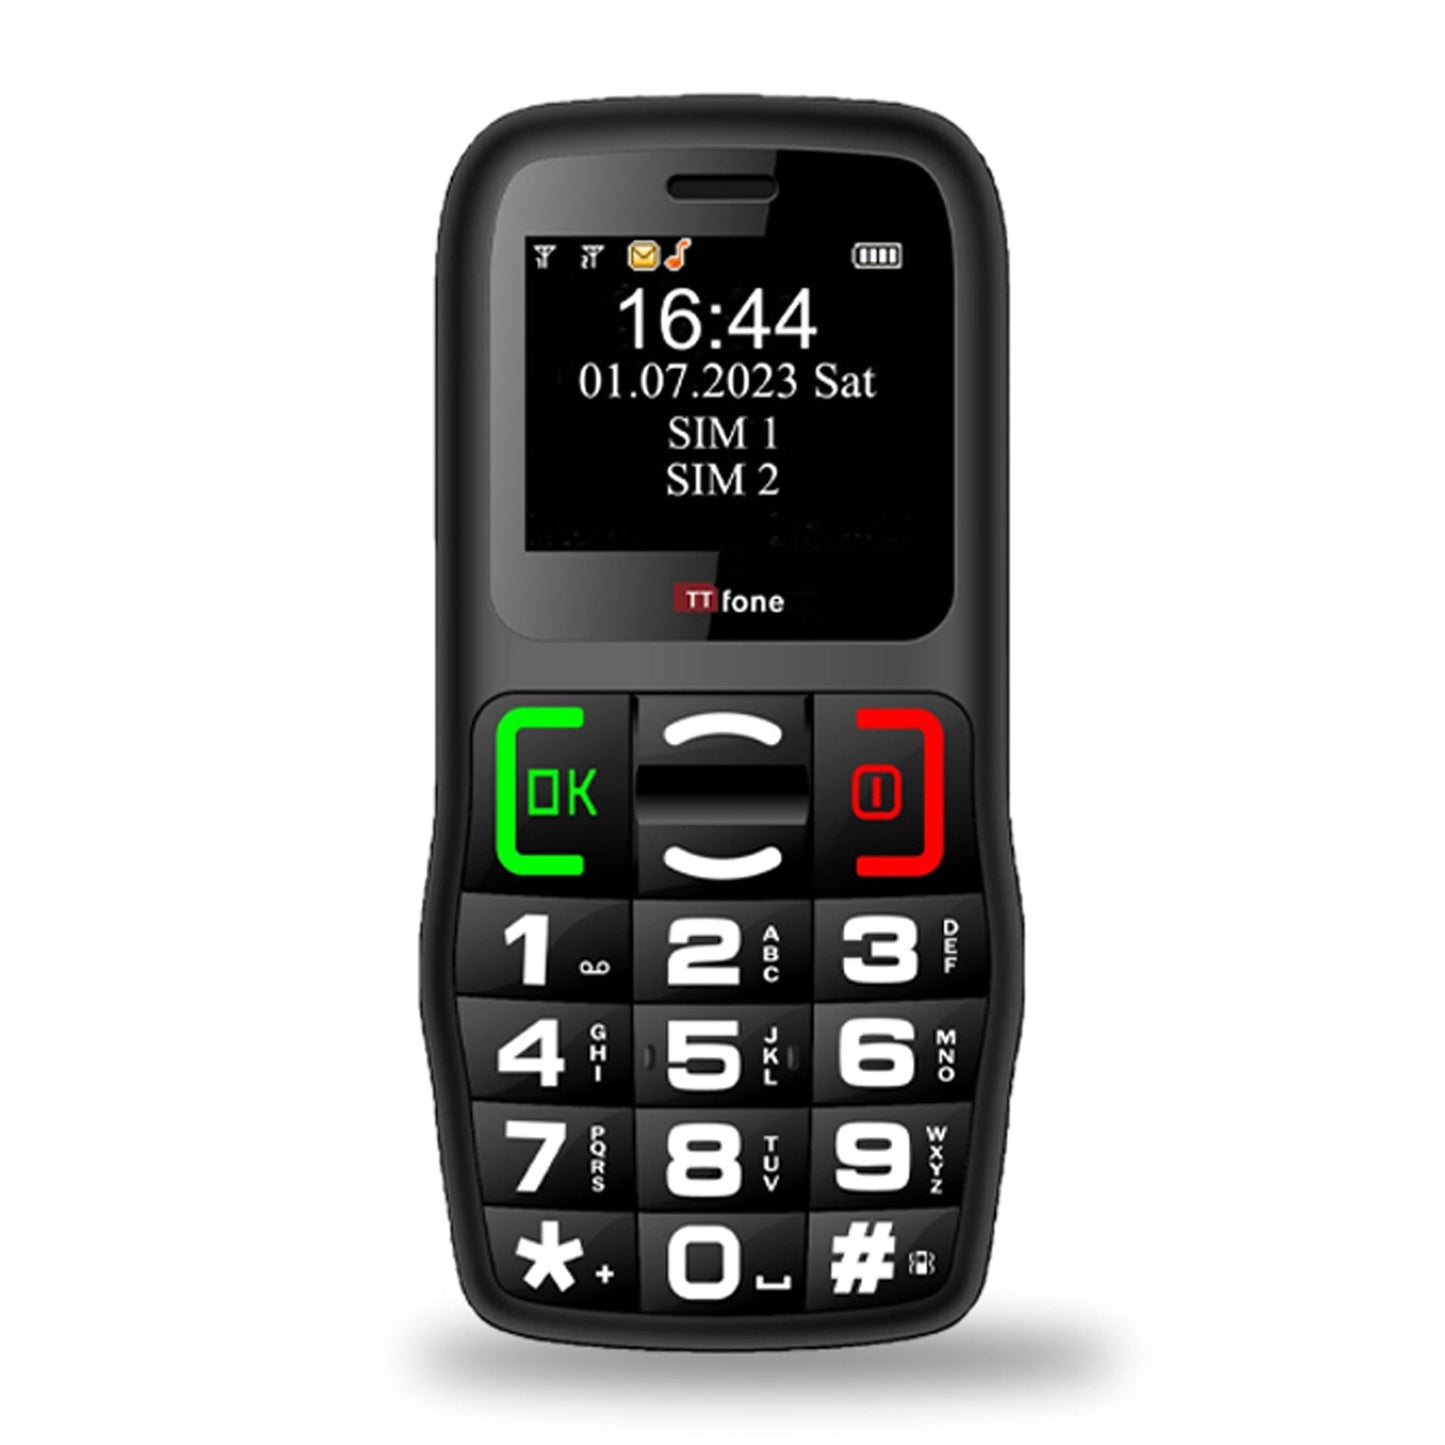 TTfone TT220 Big Button Mobile - Warehouse Deals with USB Cable, Vodafone Pay As You Go